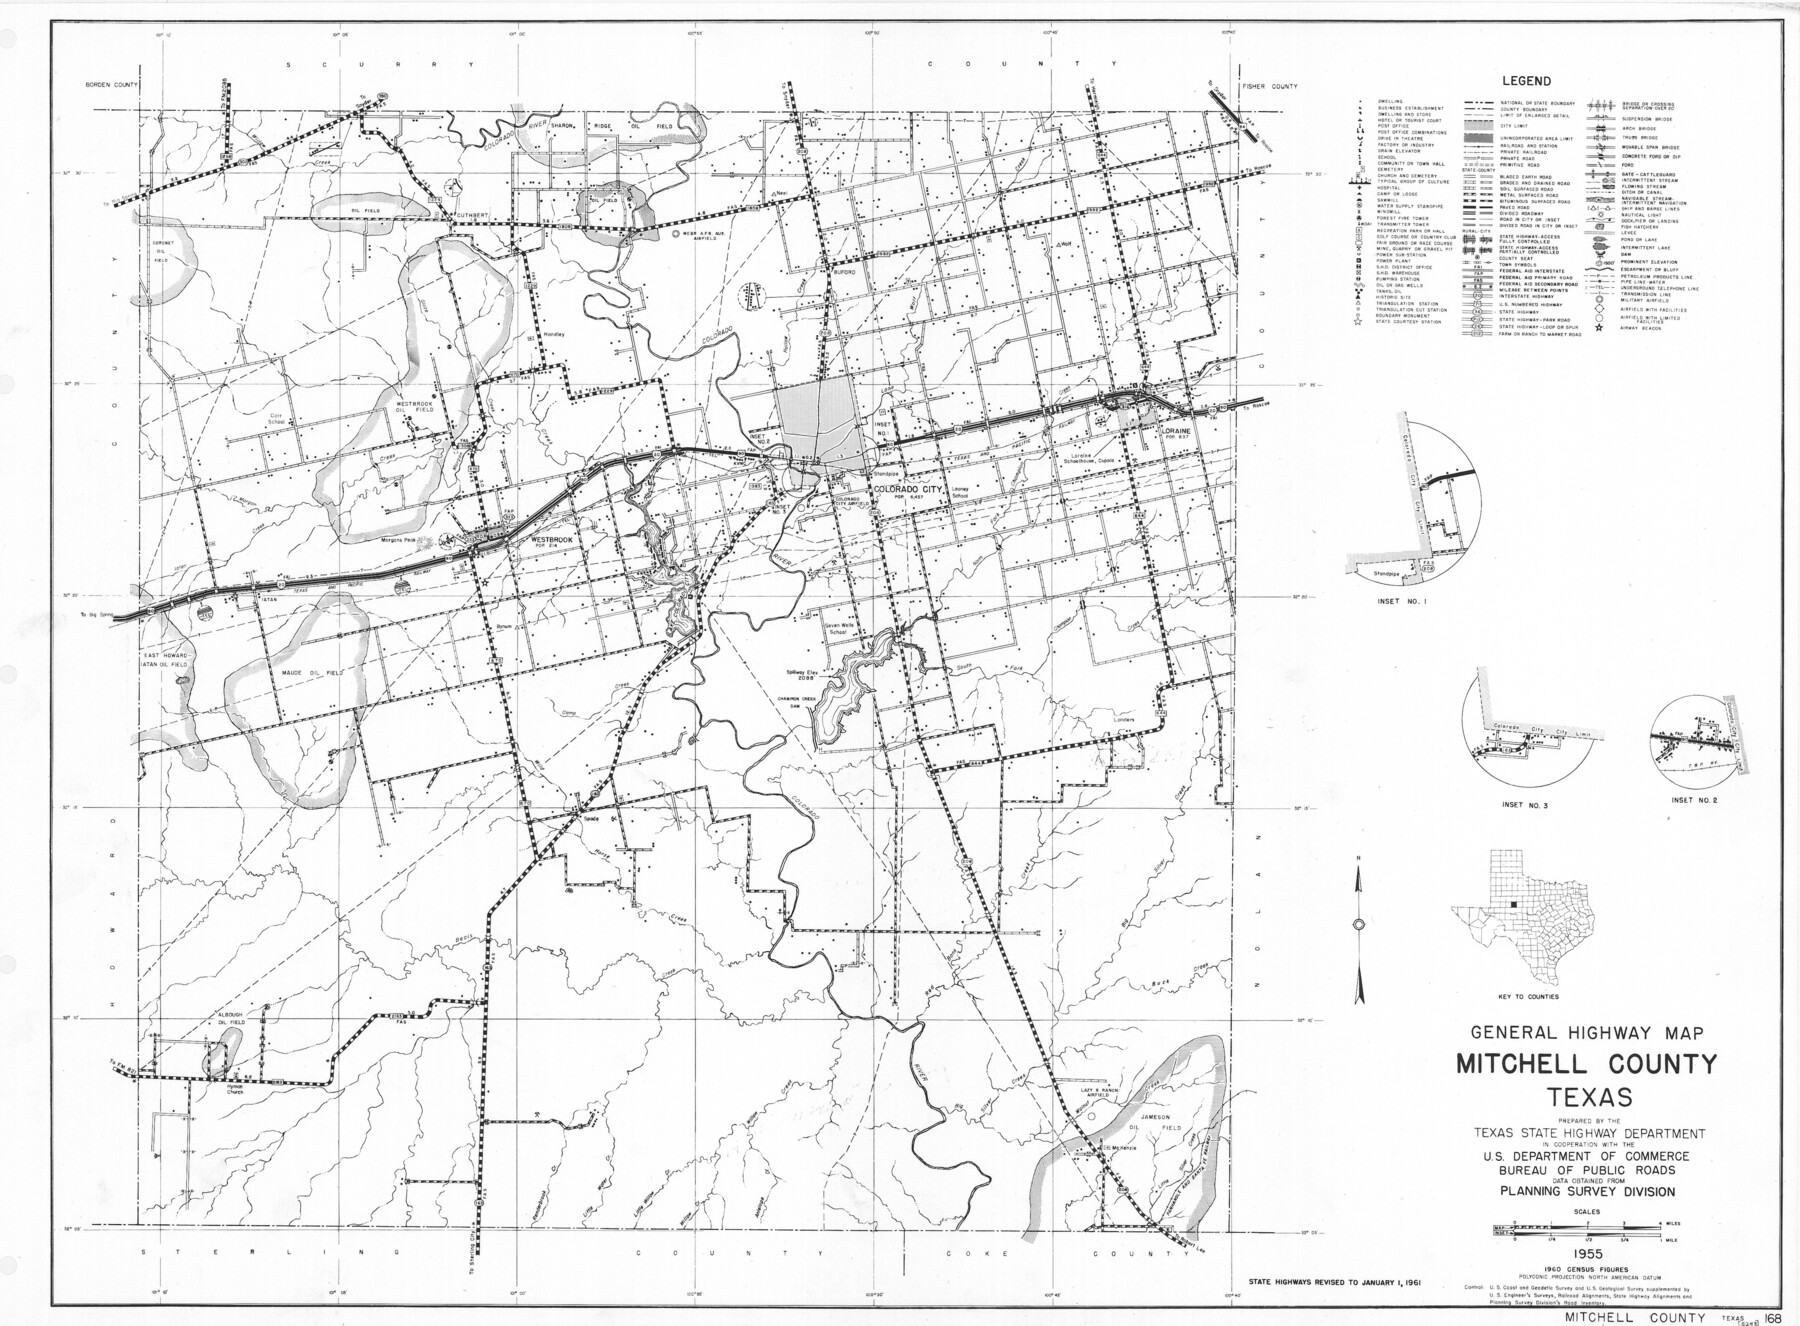 79600, General Highway Map, Mitchell County, Texas, Texas State Library and Archives